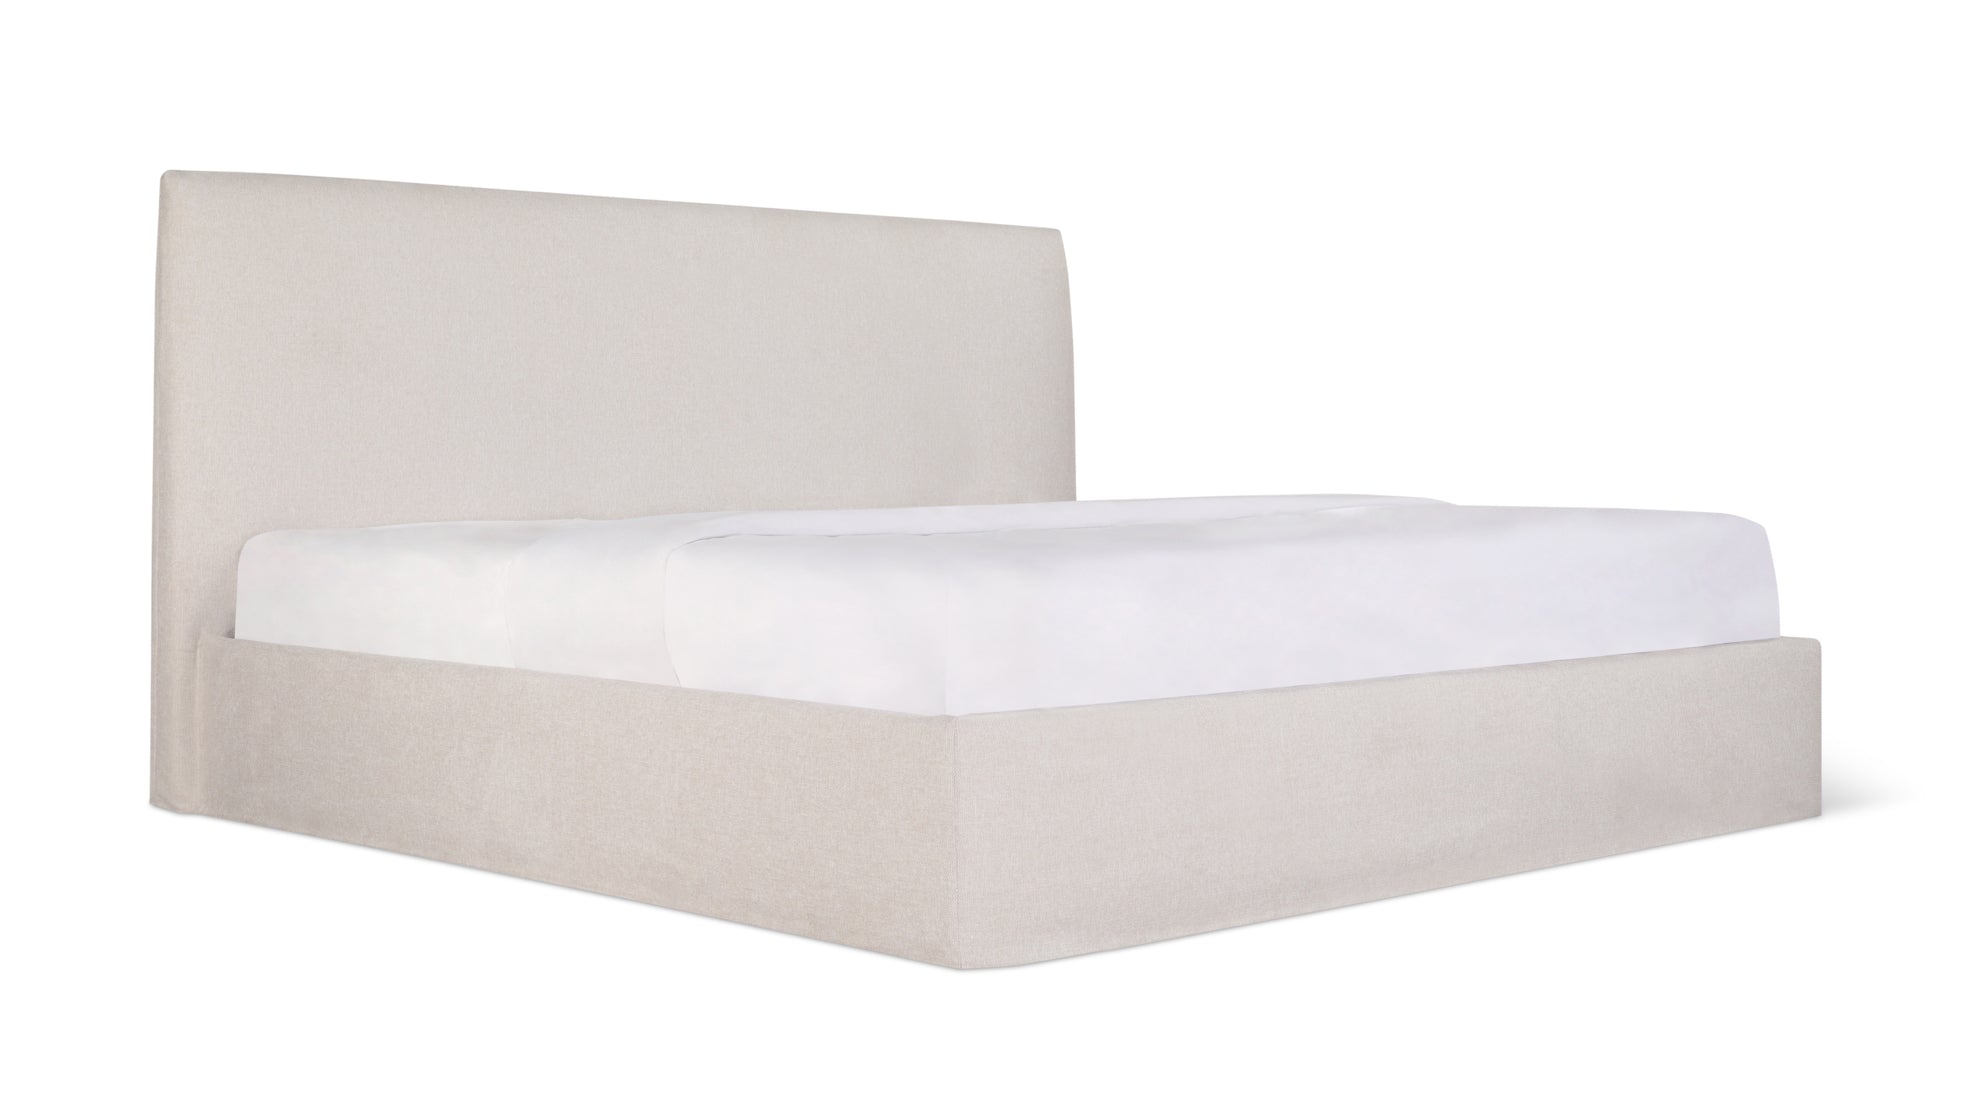 Wave Bed High Headboard with Storage, King, Latte - Image 3